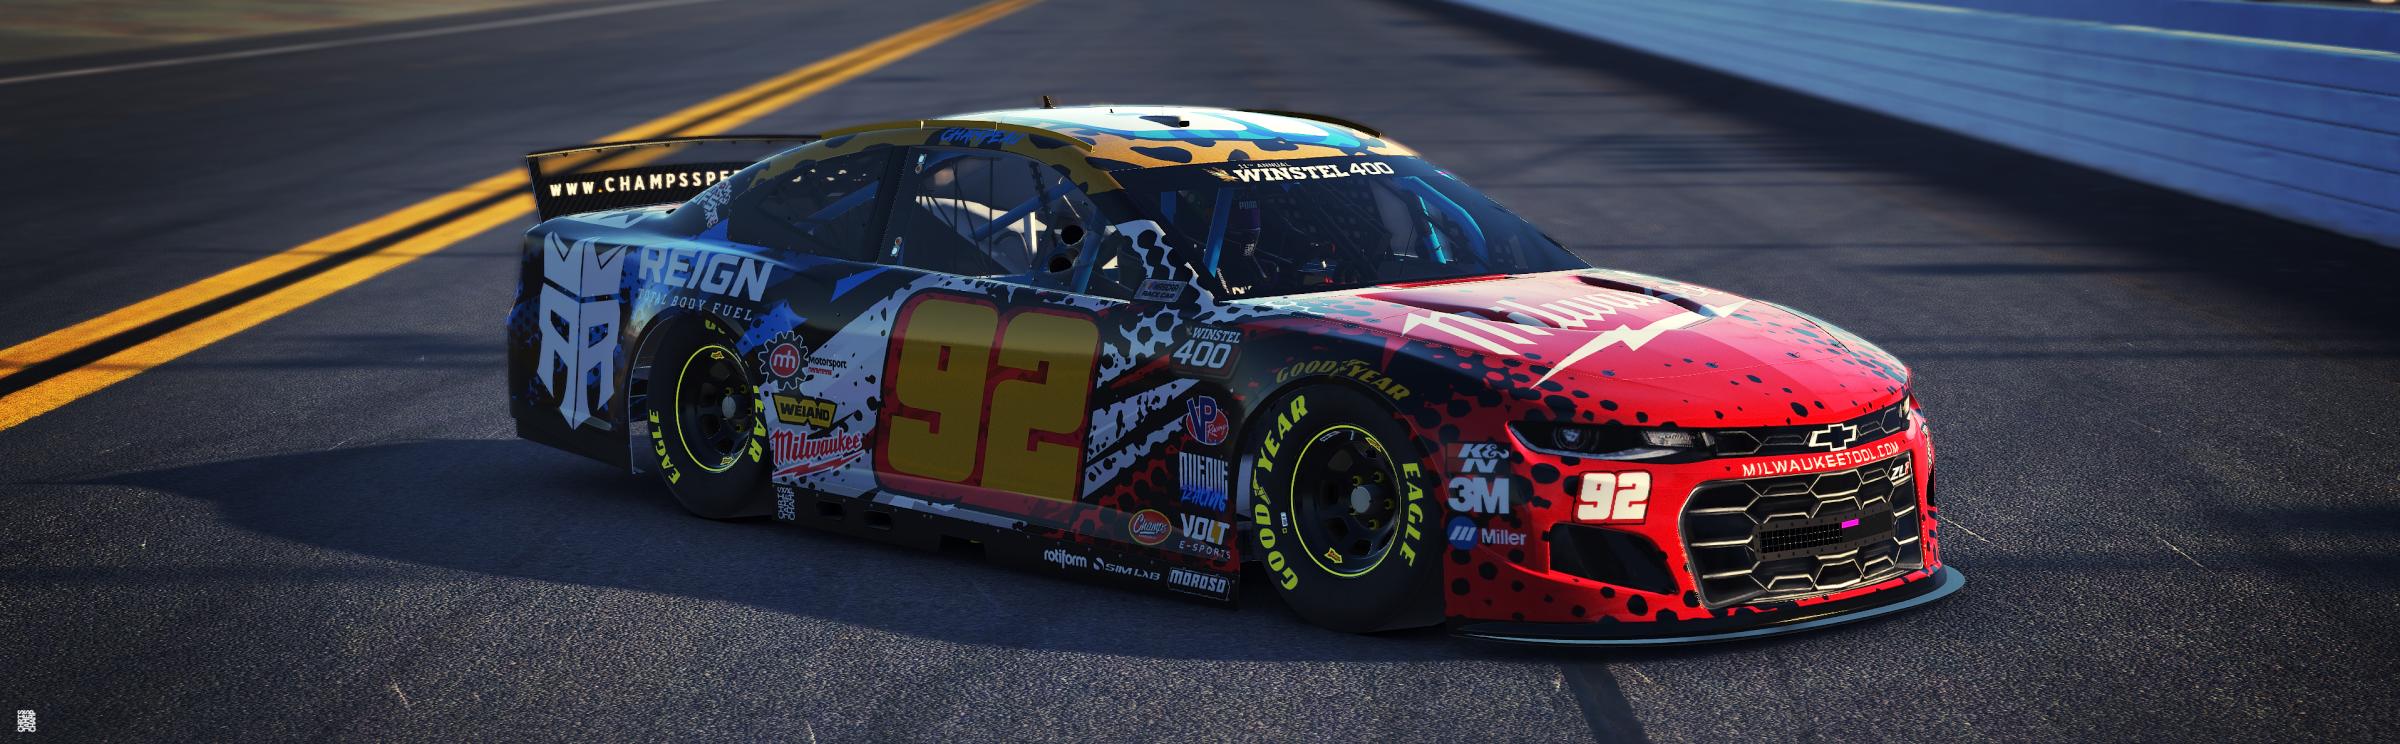 Preview of Milwaukee Tools + Reign Energy Chevy Camaro by Chris Champeau